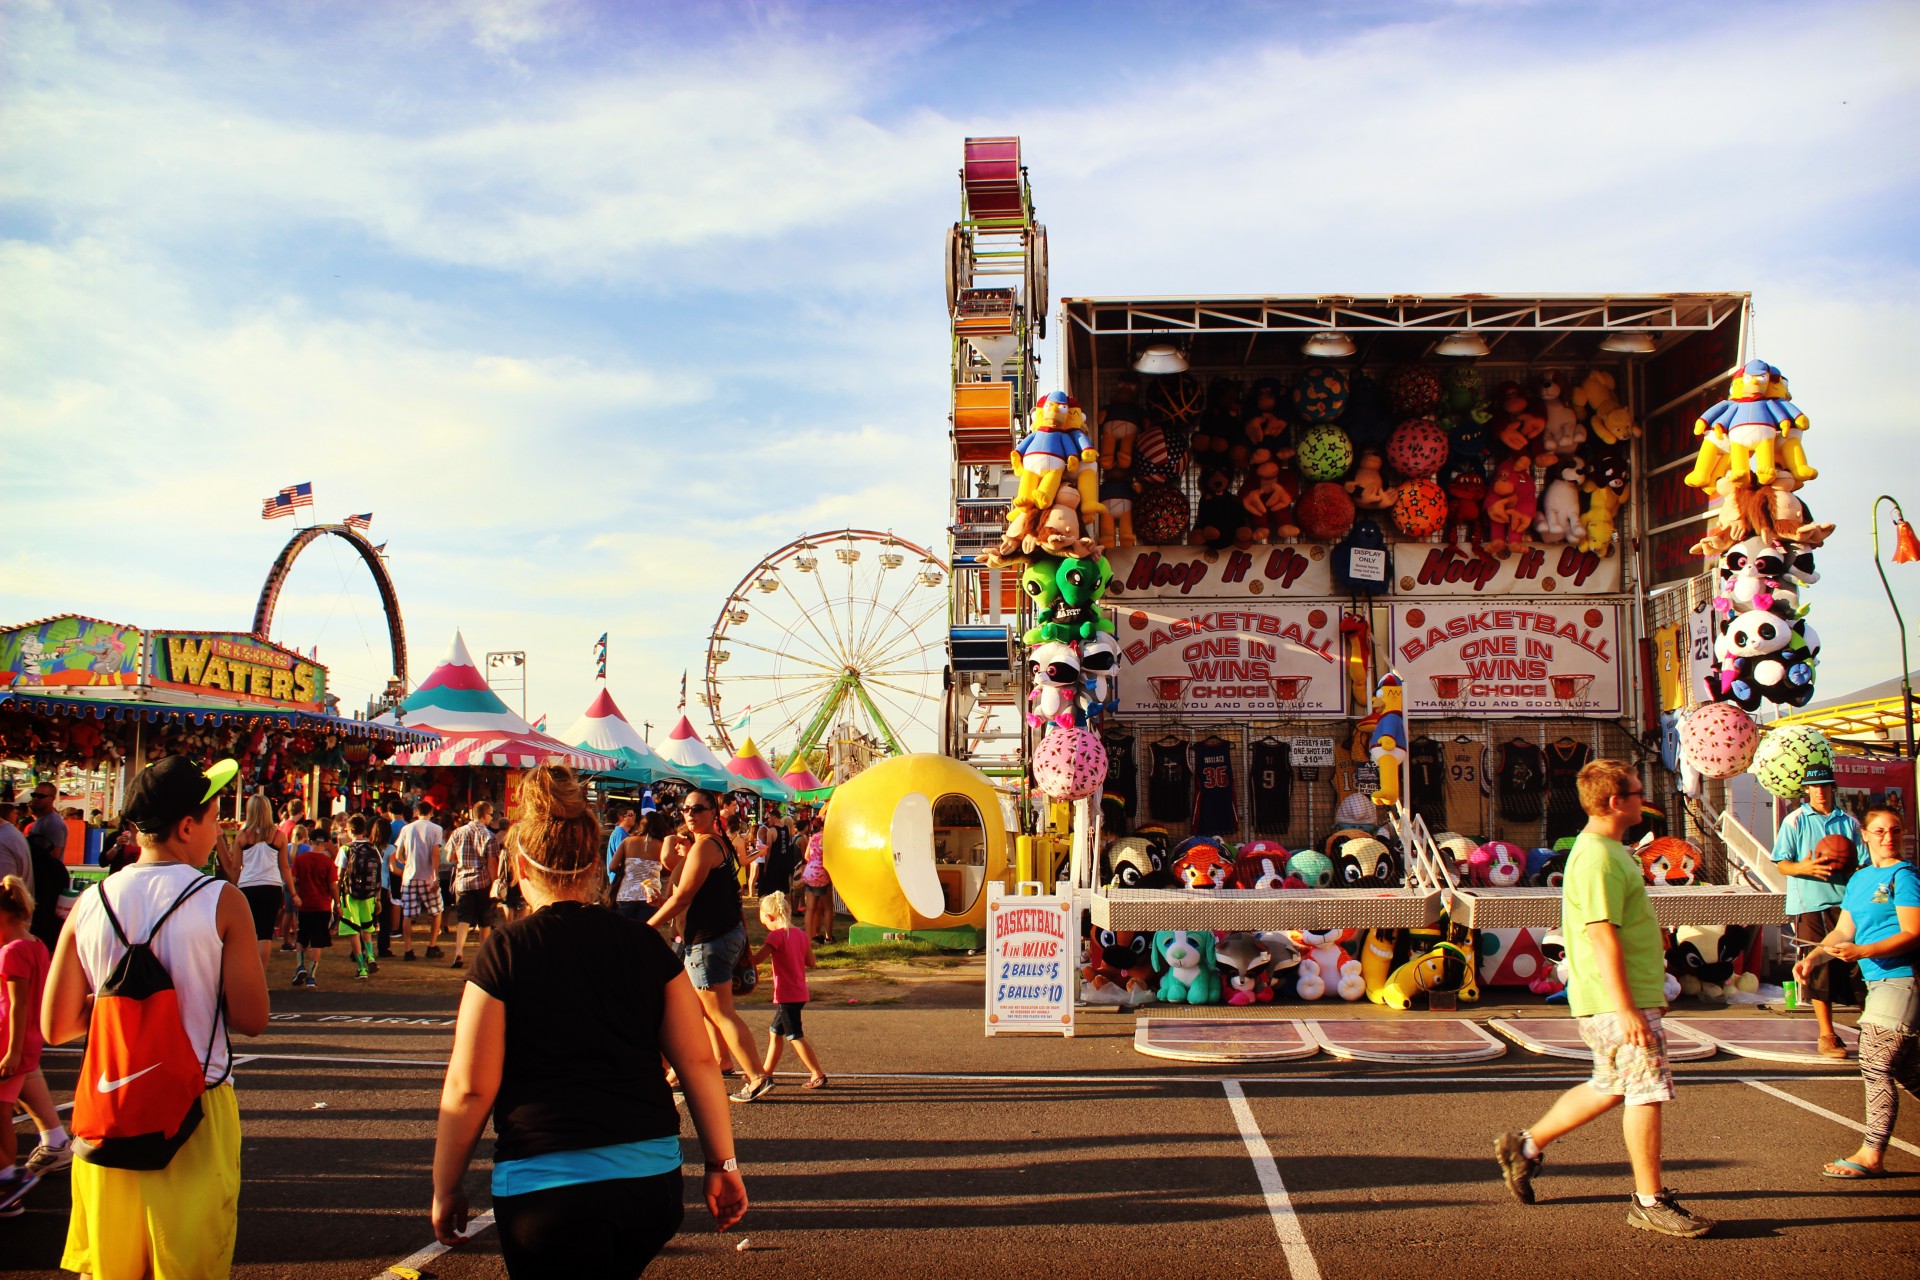 Carnival fairgrounds, people and rides.